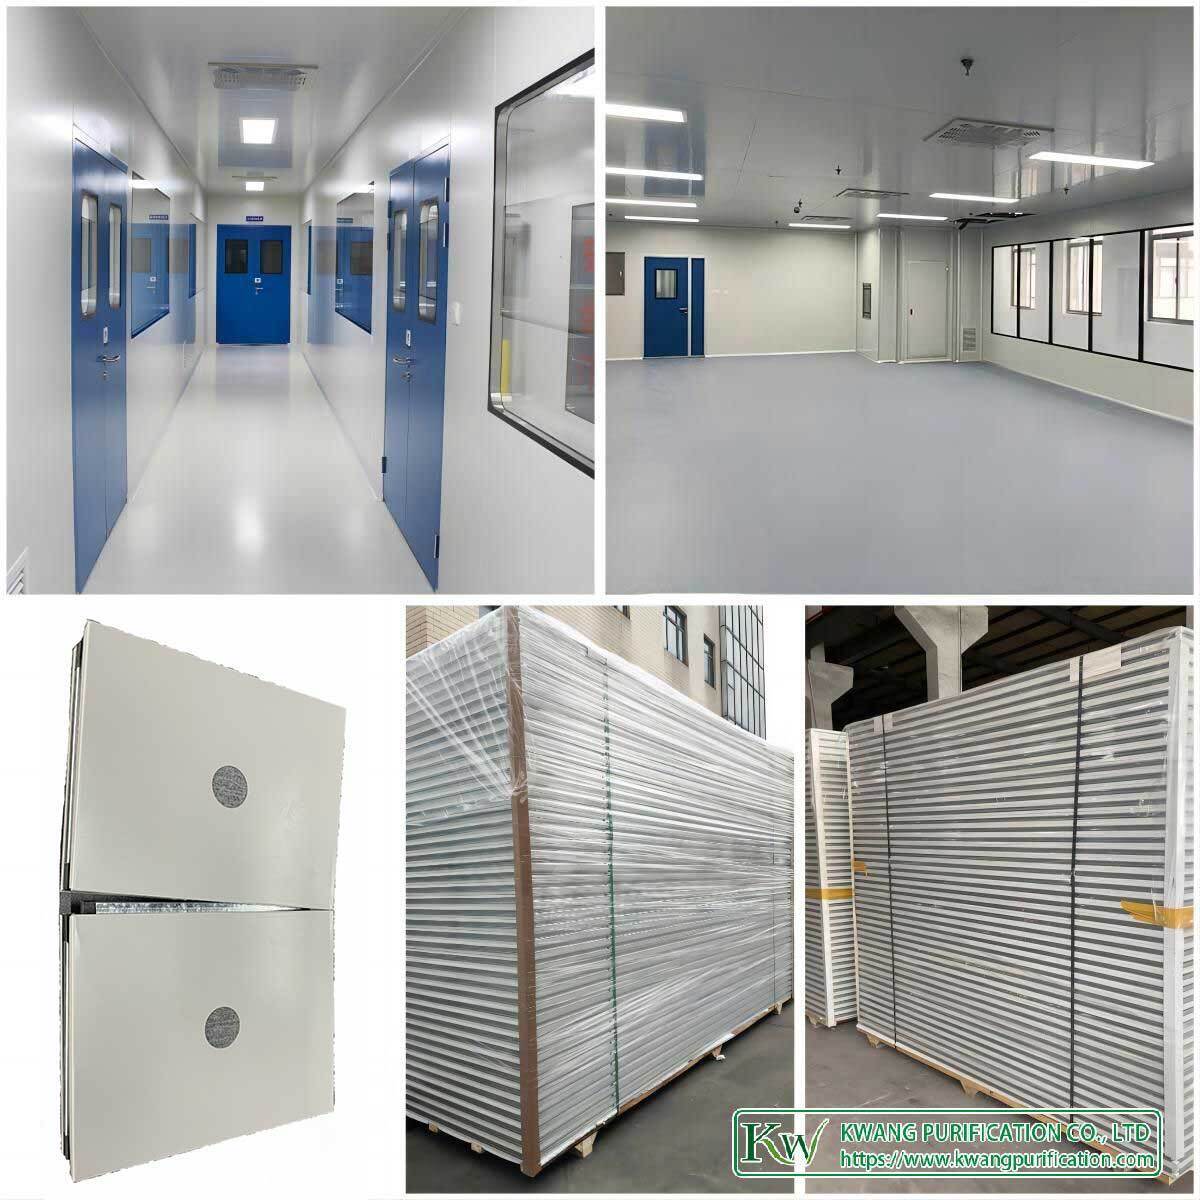 Rockwool Handmade Cleanroom: Enhancing Cleanroom Performance and Contamination Control